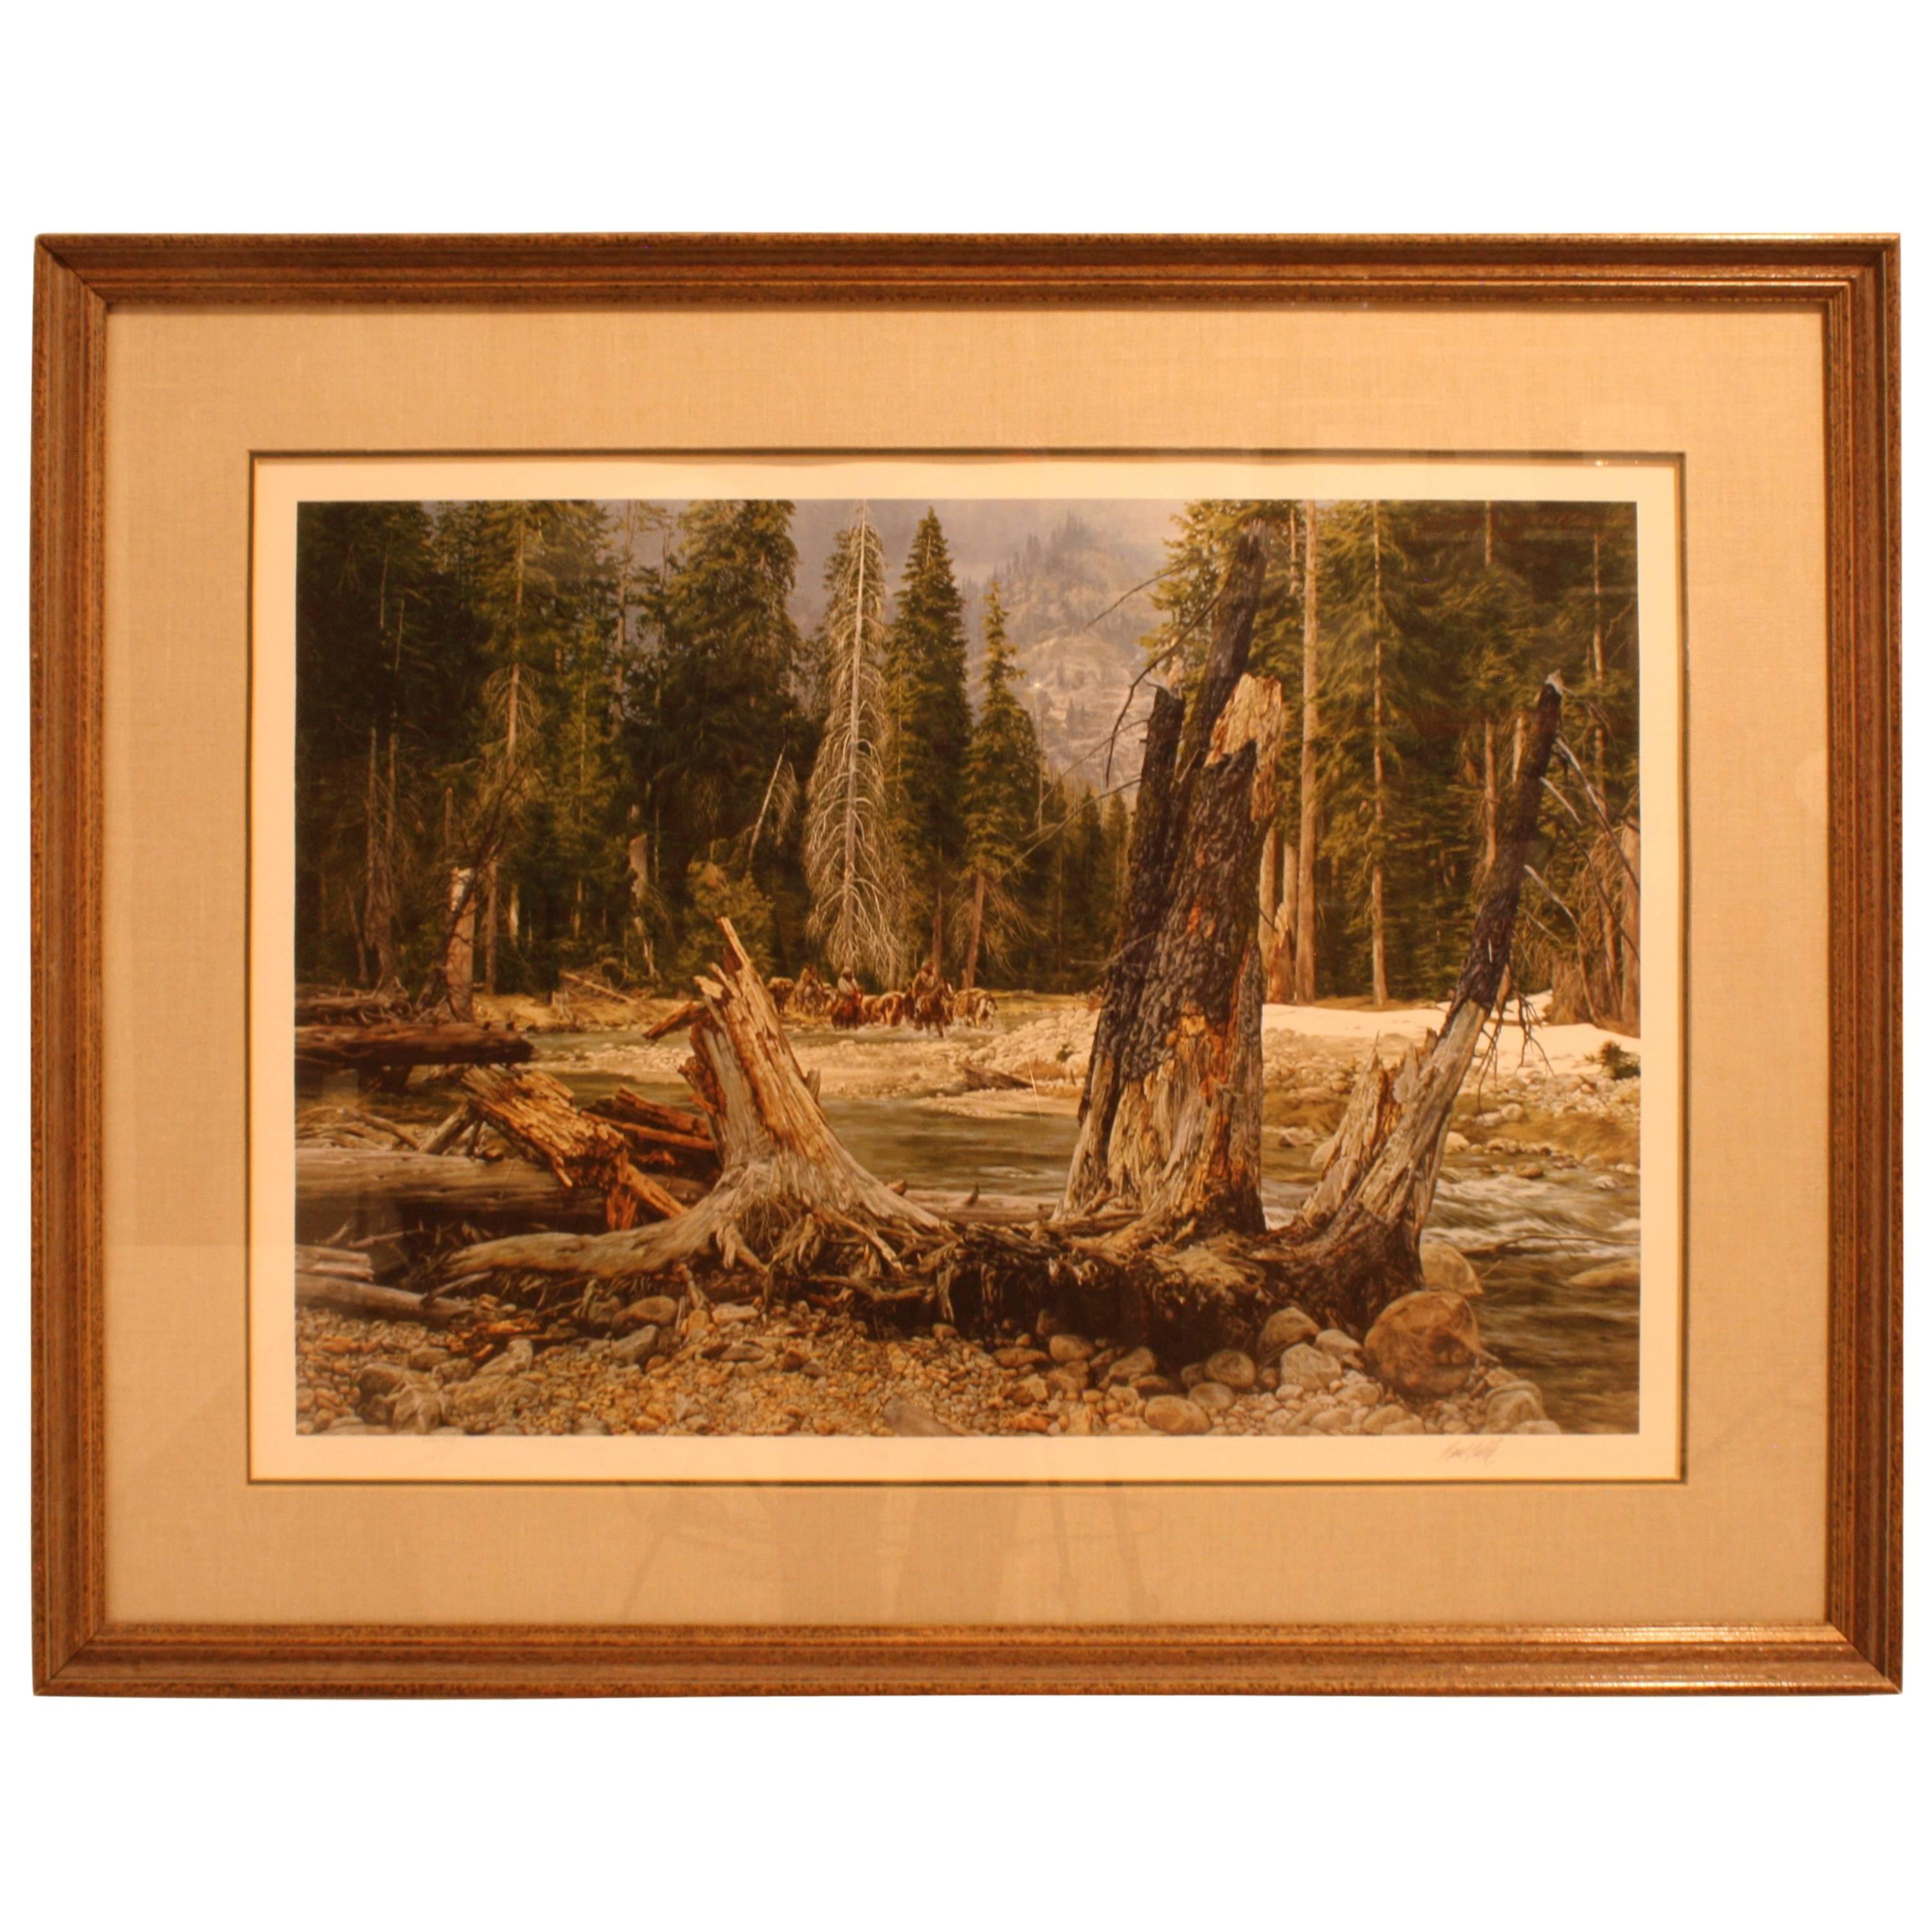 Paul Calle "In Search of Beaver" Signed Le Artist Print # 652/950 For Sale